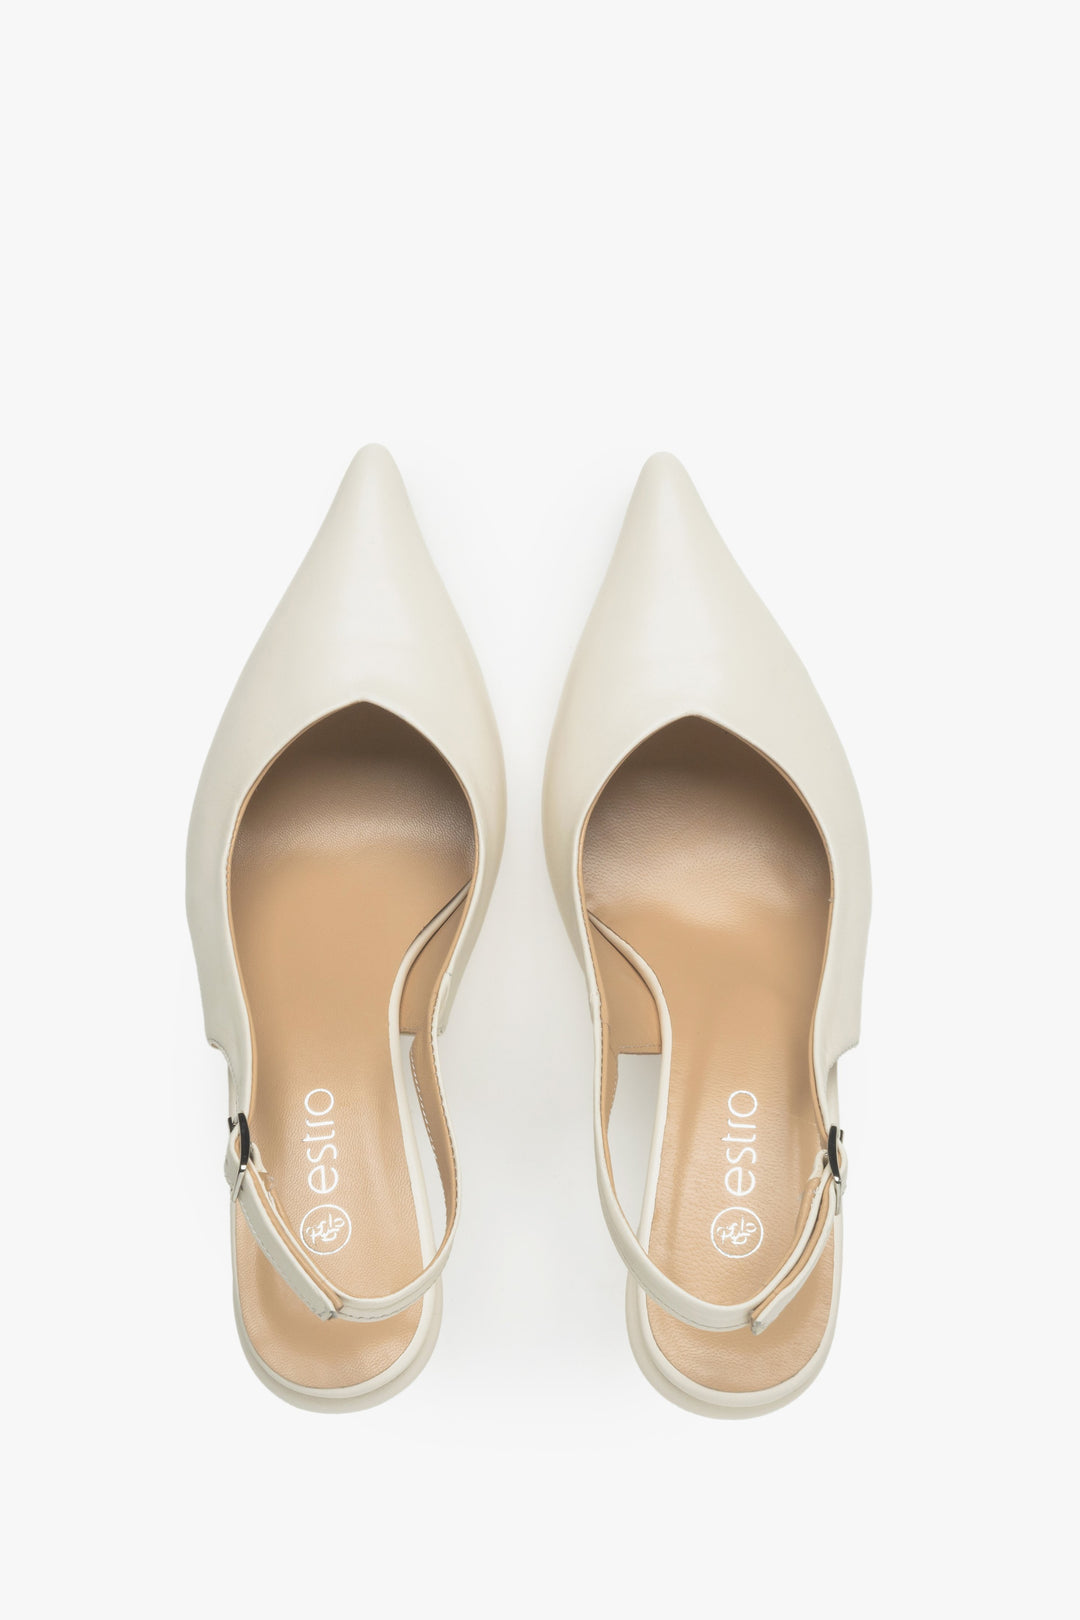 Women's white leather slingback pumps - top view presentation of the model.